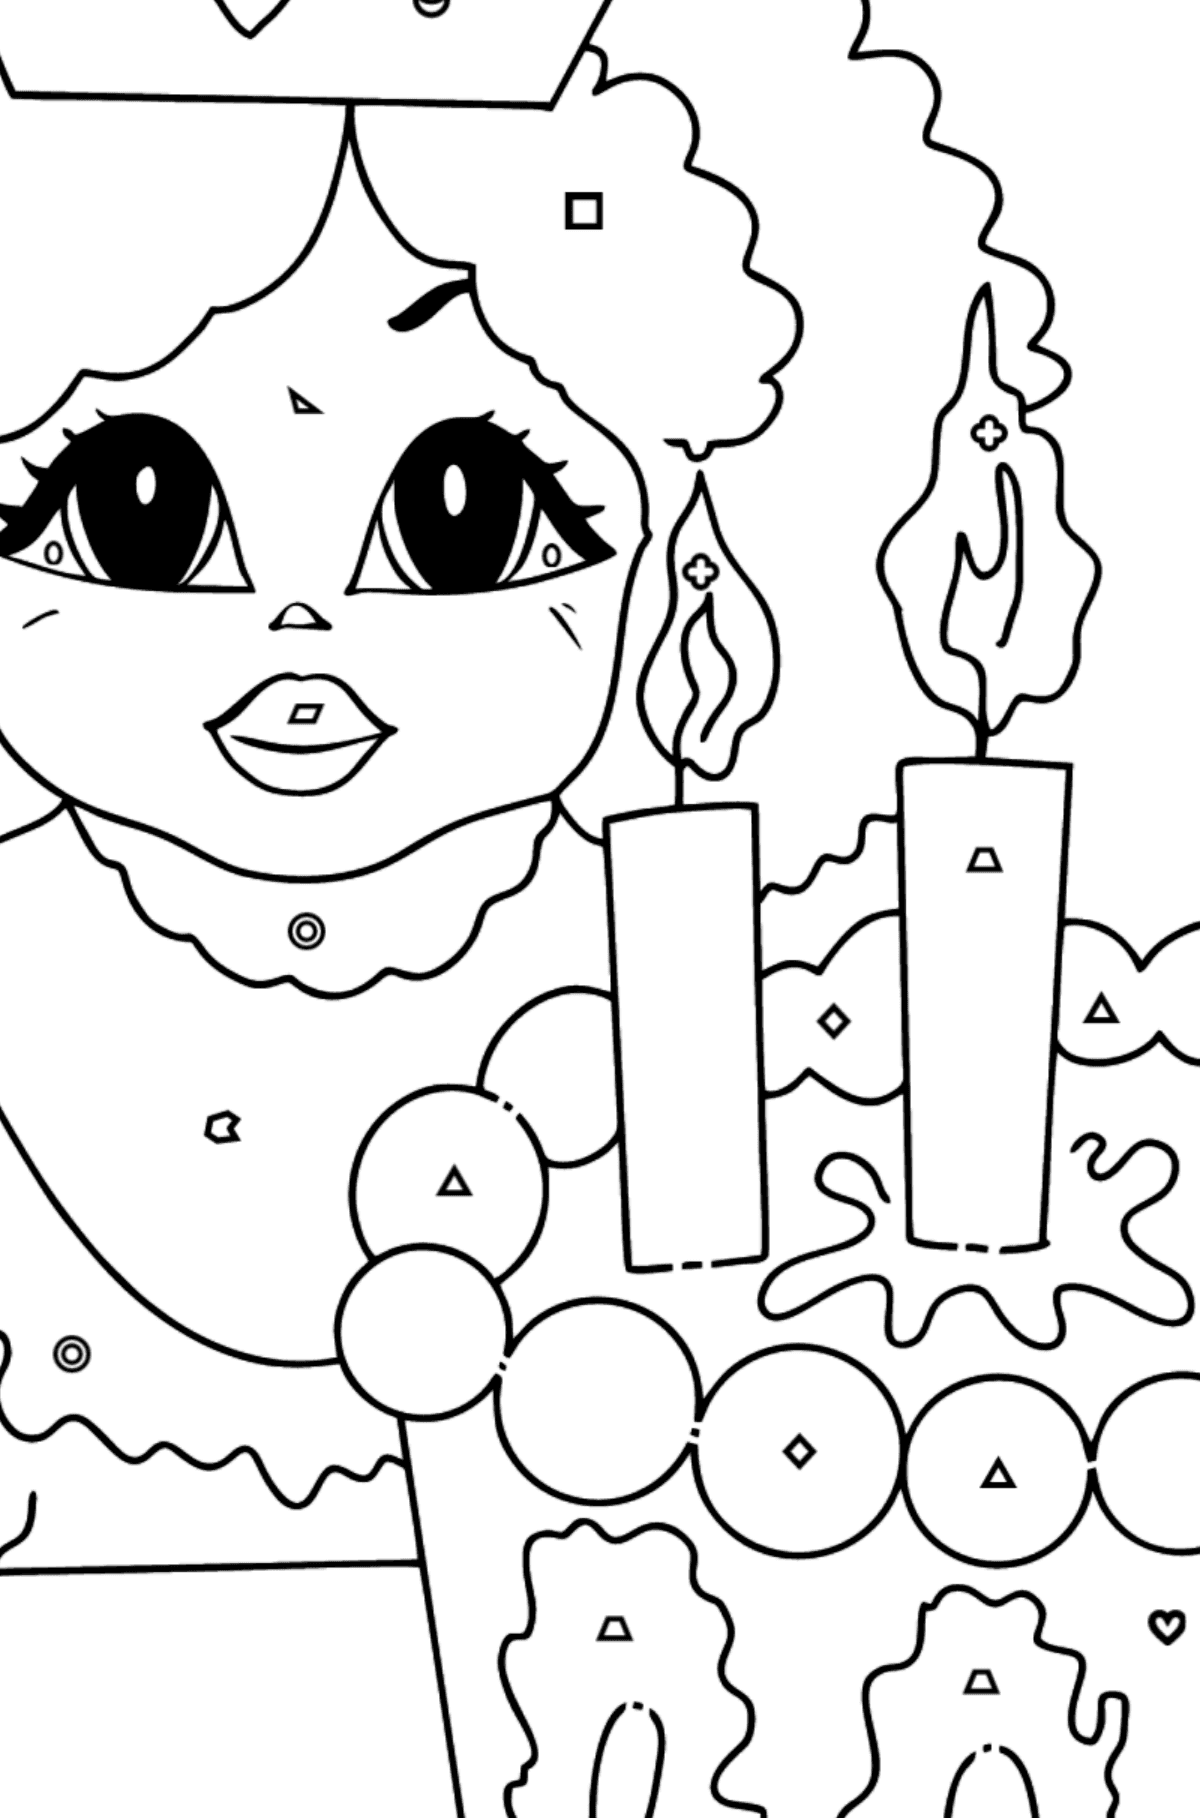 Coloring Picture - A Princess with Cake - Coloring by Geometric Shapes for Kids